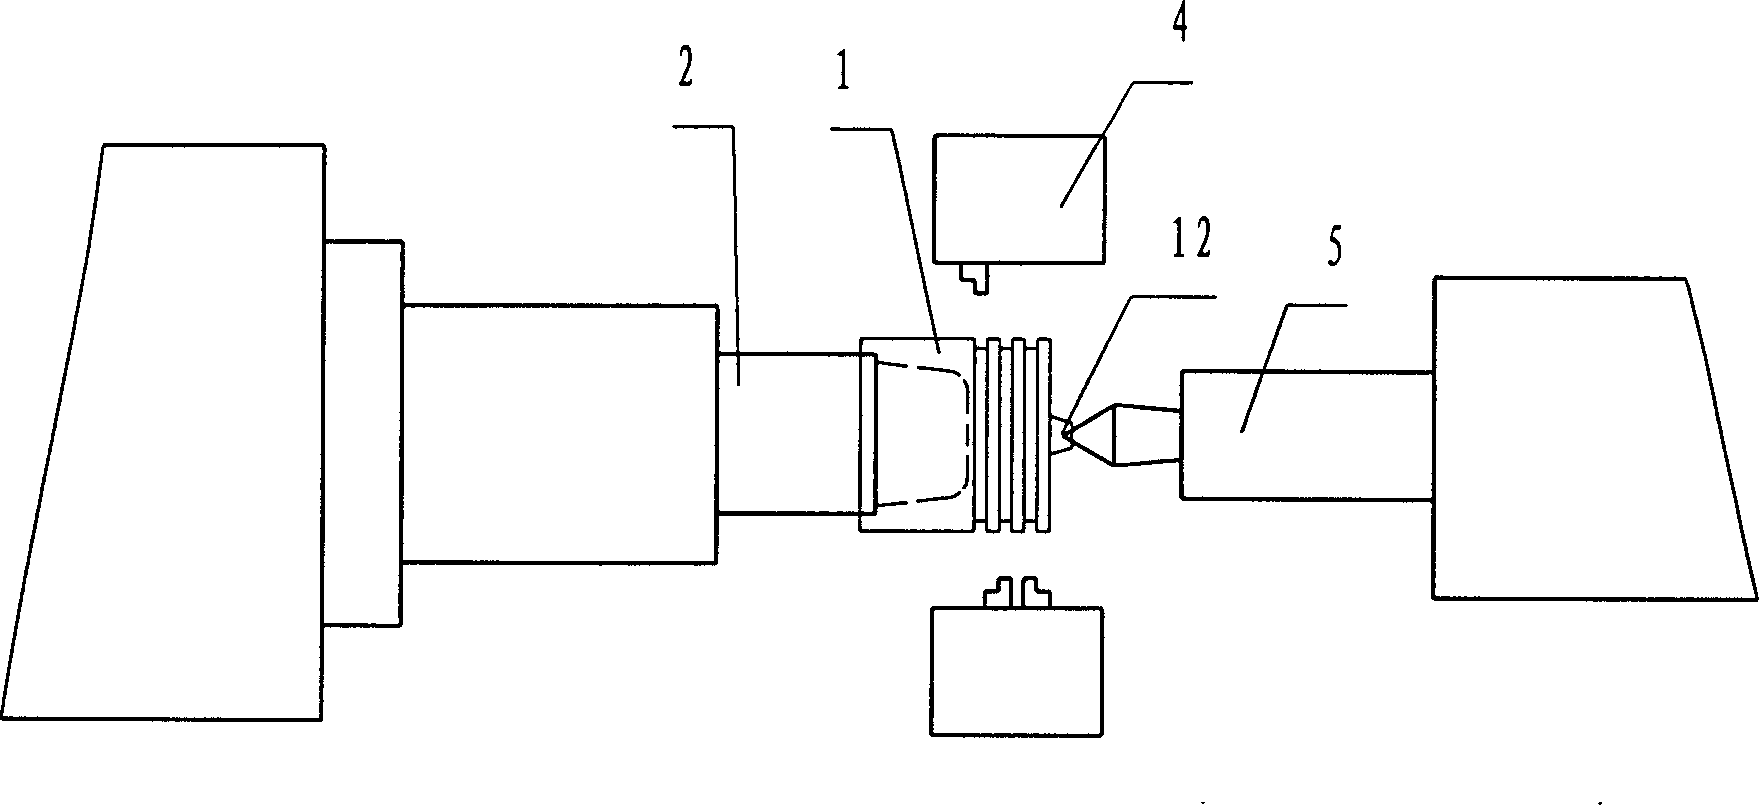 Positioning and clamping method for processing piston and processing technique